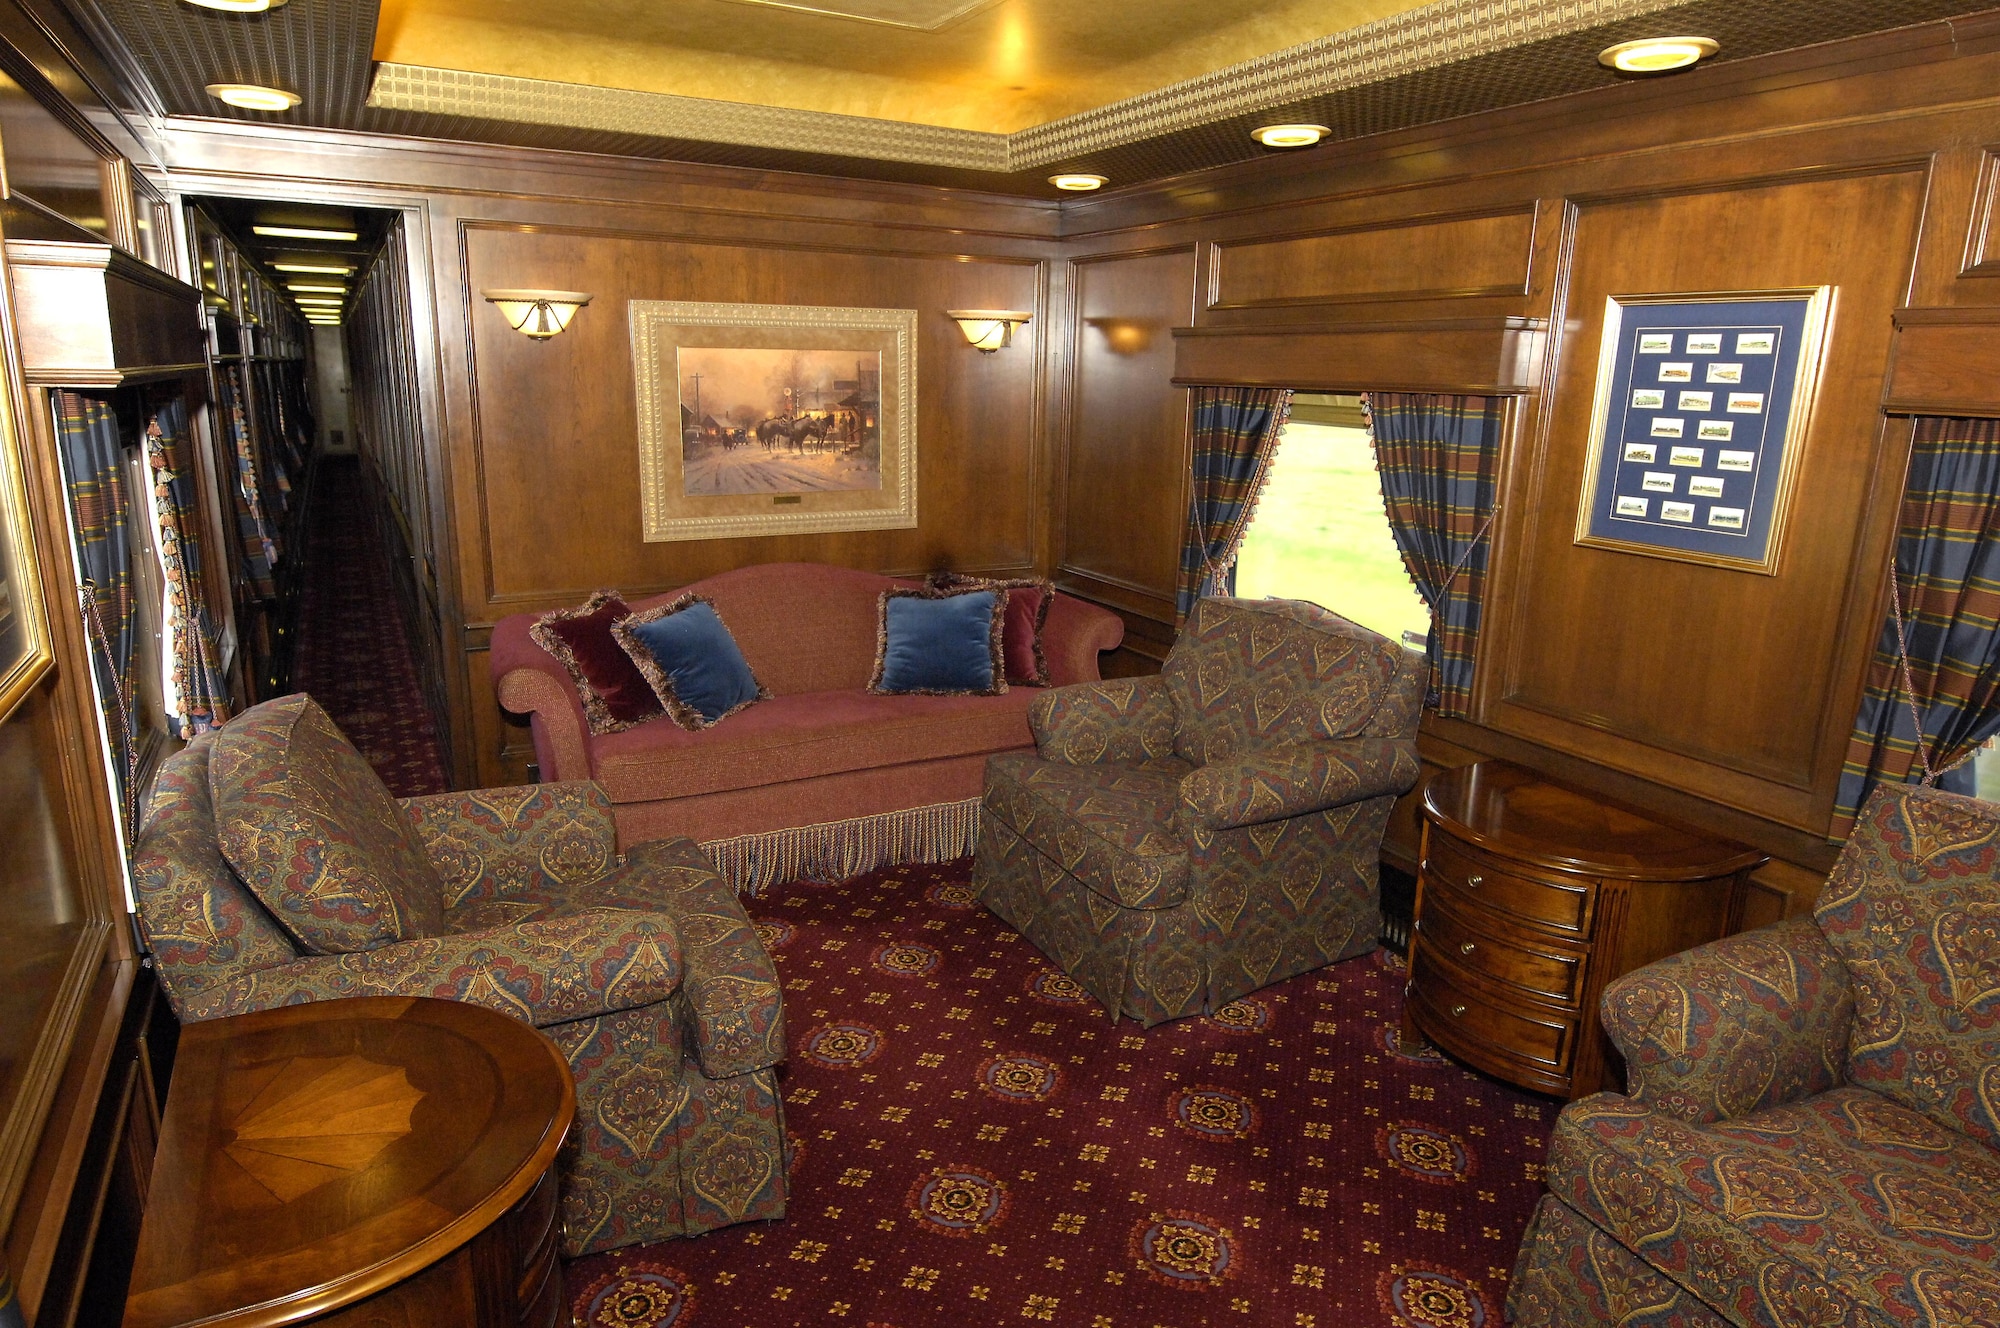 The "Omaha," a deluxe four-bedroom sleeper car that is one of Union Pacific's historical Western Heritage Fleet of railcars. Members of Team Offutt were given a train ride to Grand Island, Neb. May 27 where they learned about UP and the company's mission. (U.S. Air Force photo by Delanie Stafford)